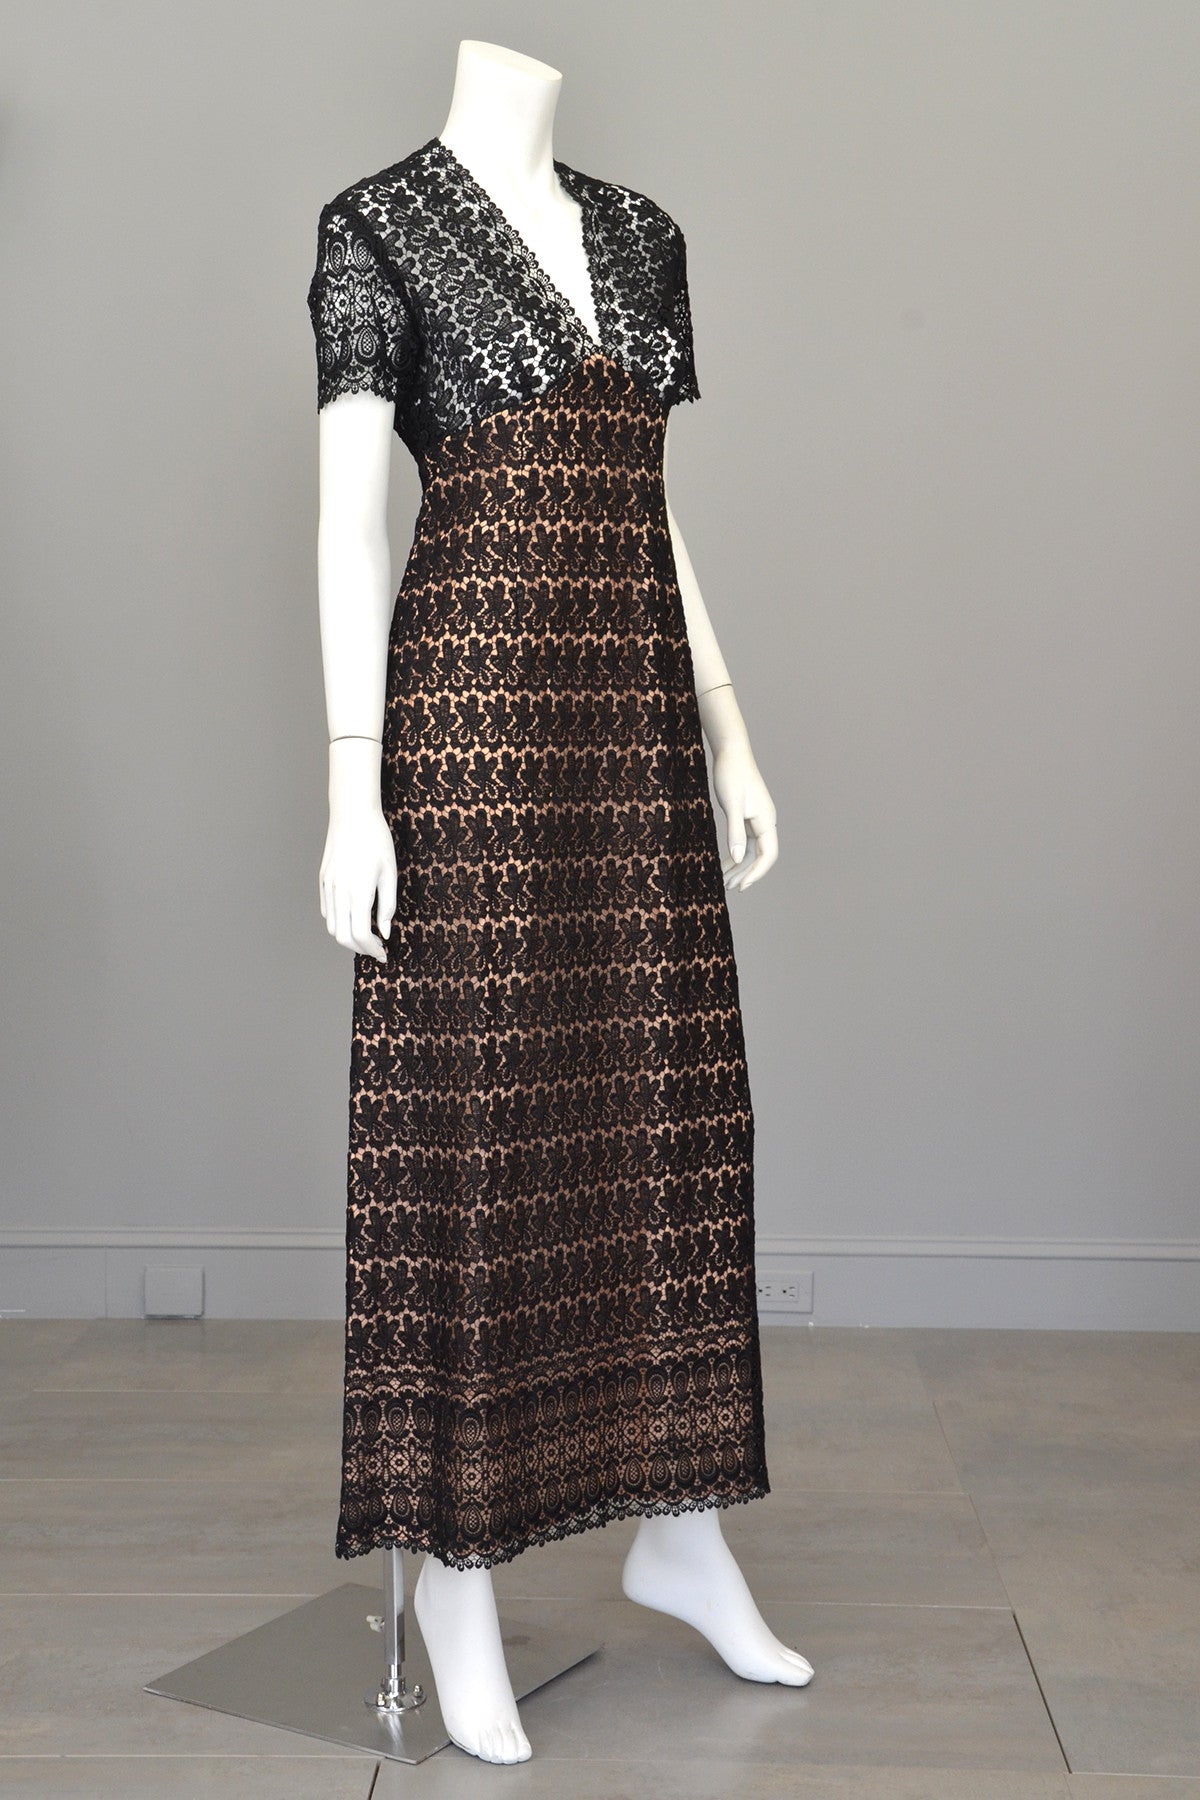 1960s 70s Black Illusion Lace Vintage Babydoll Maxi Dress Gown with Keyhole Back